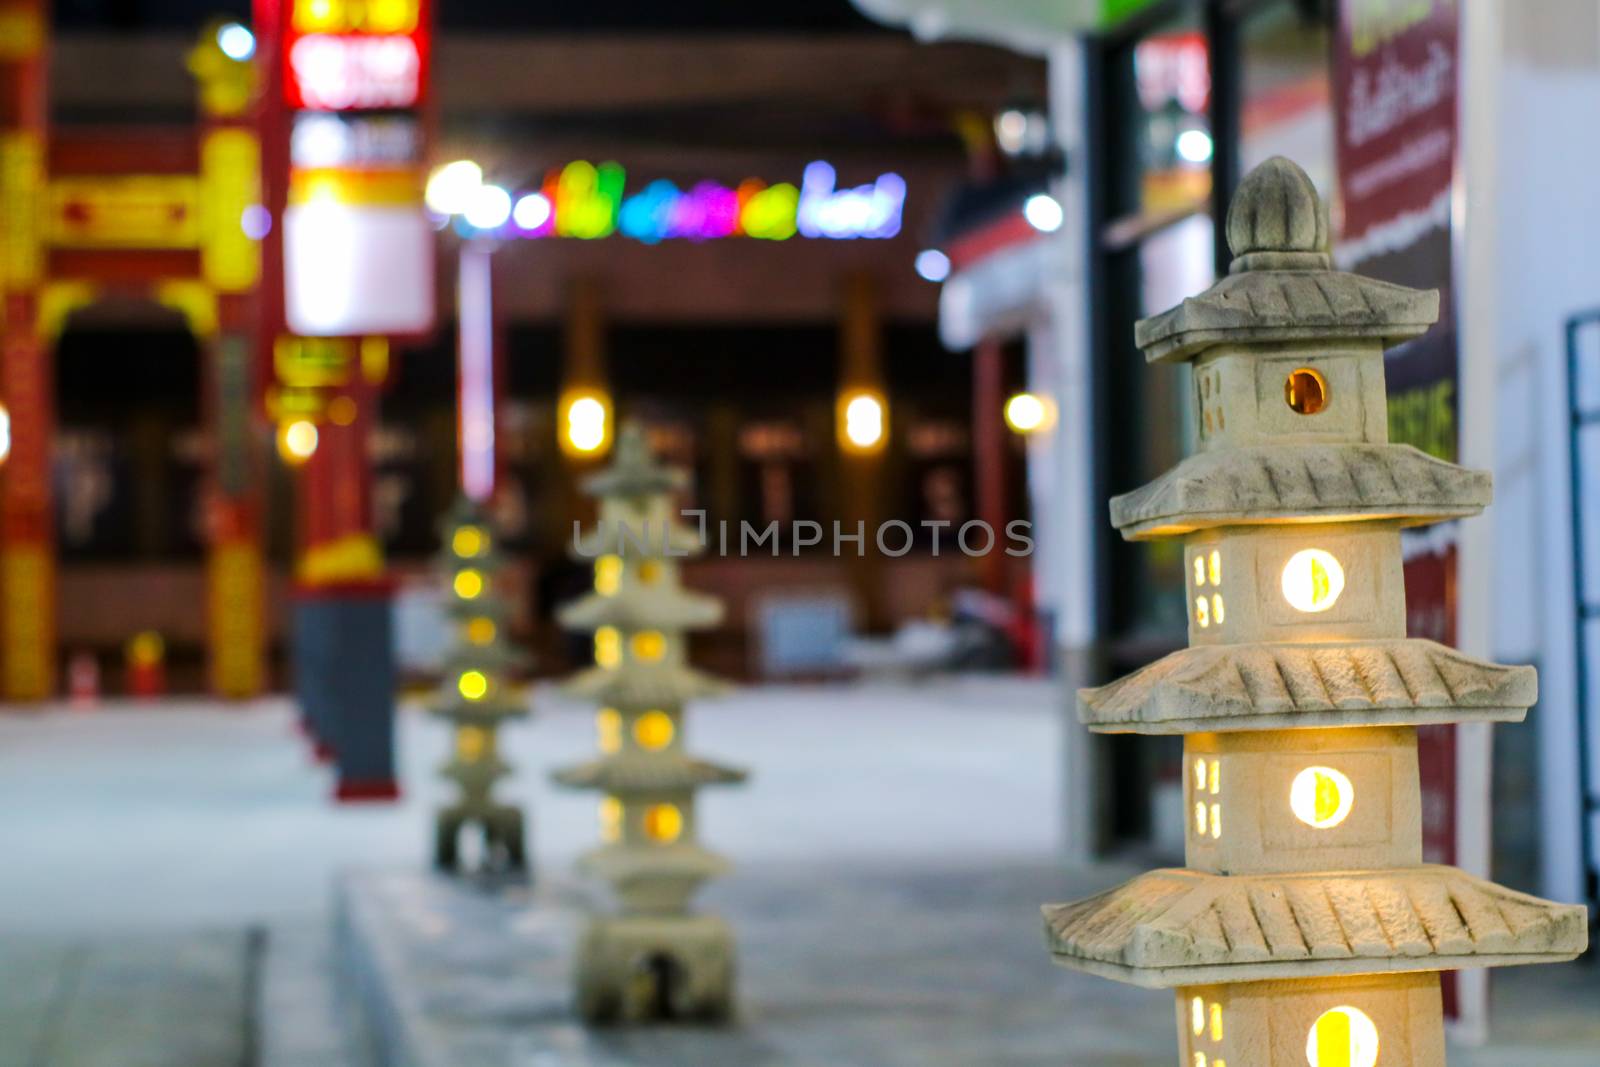 The five-story pagoda statue is decorated with decorative lanterns in the garden in china town